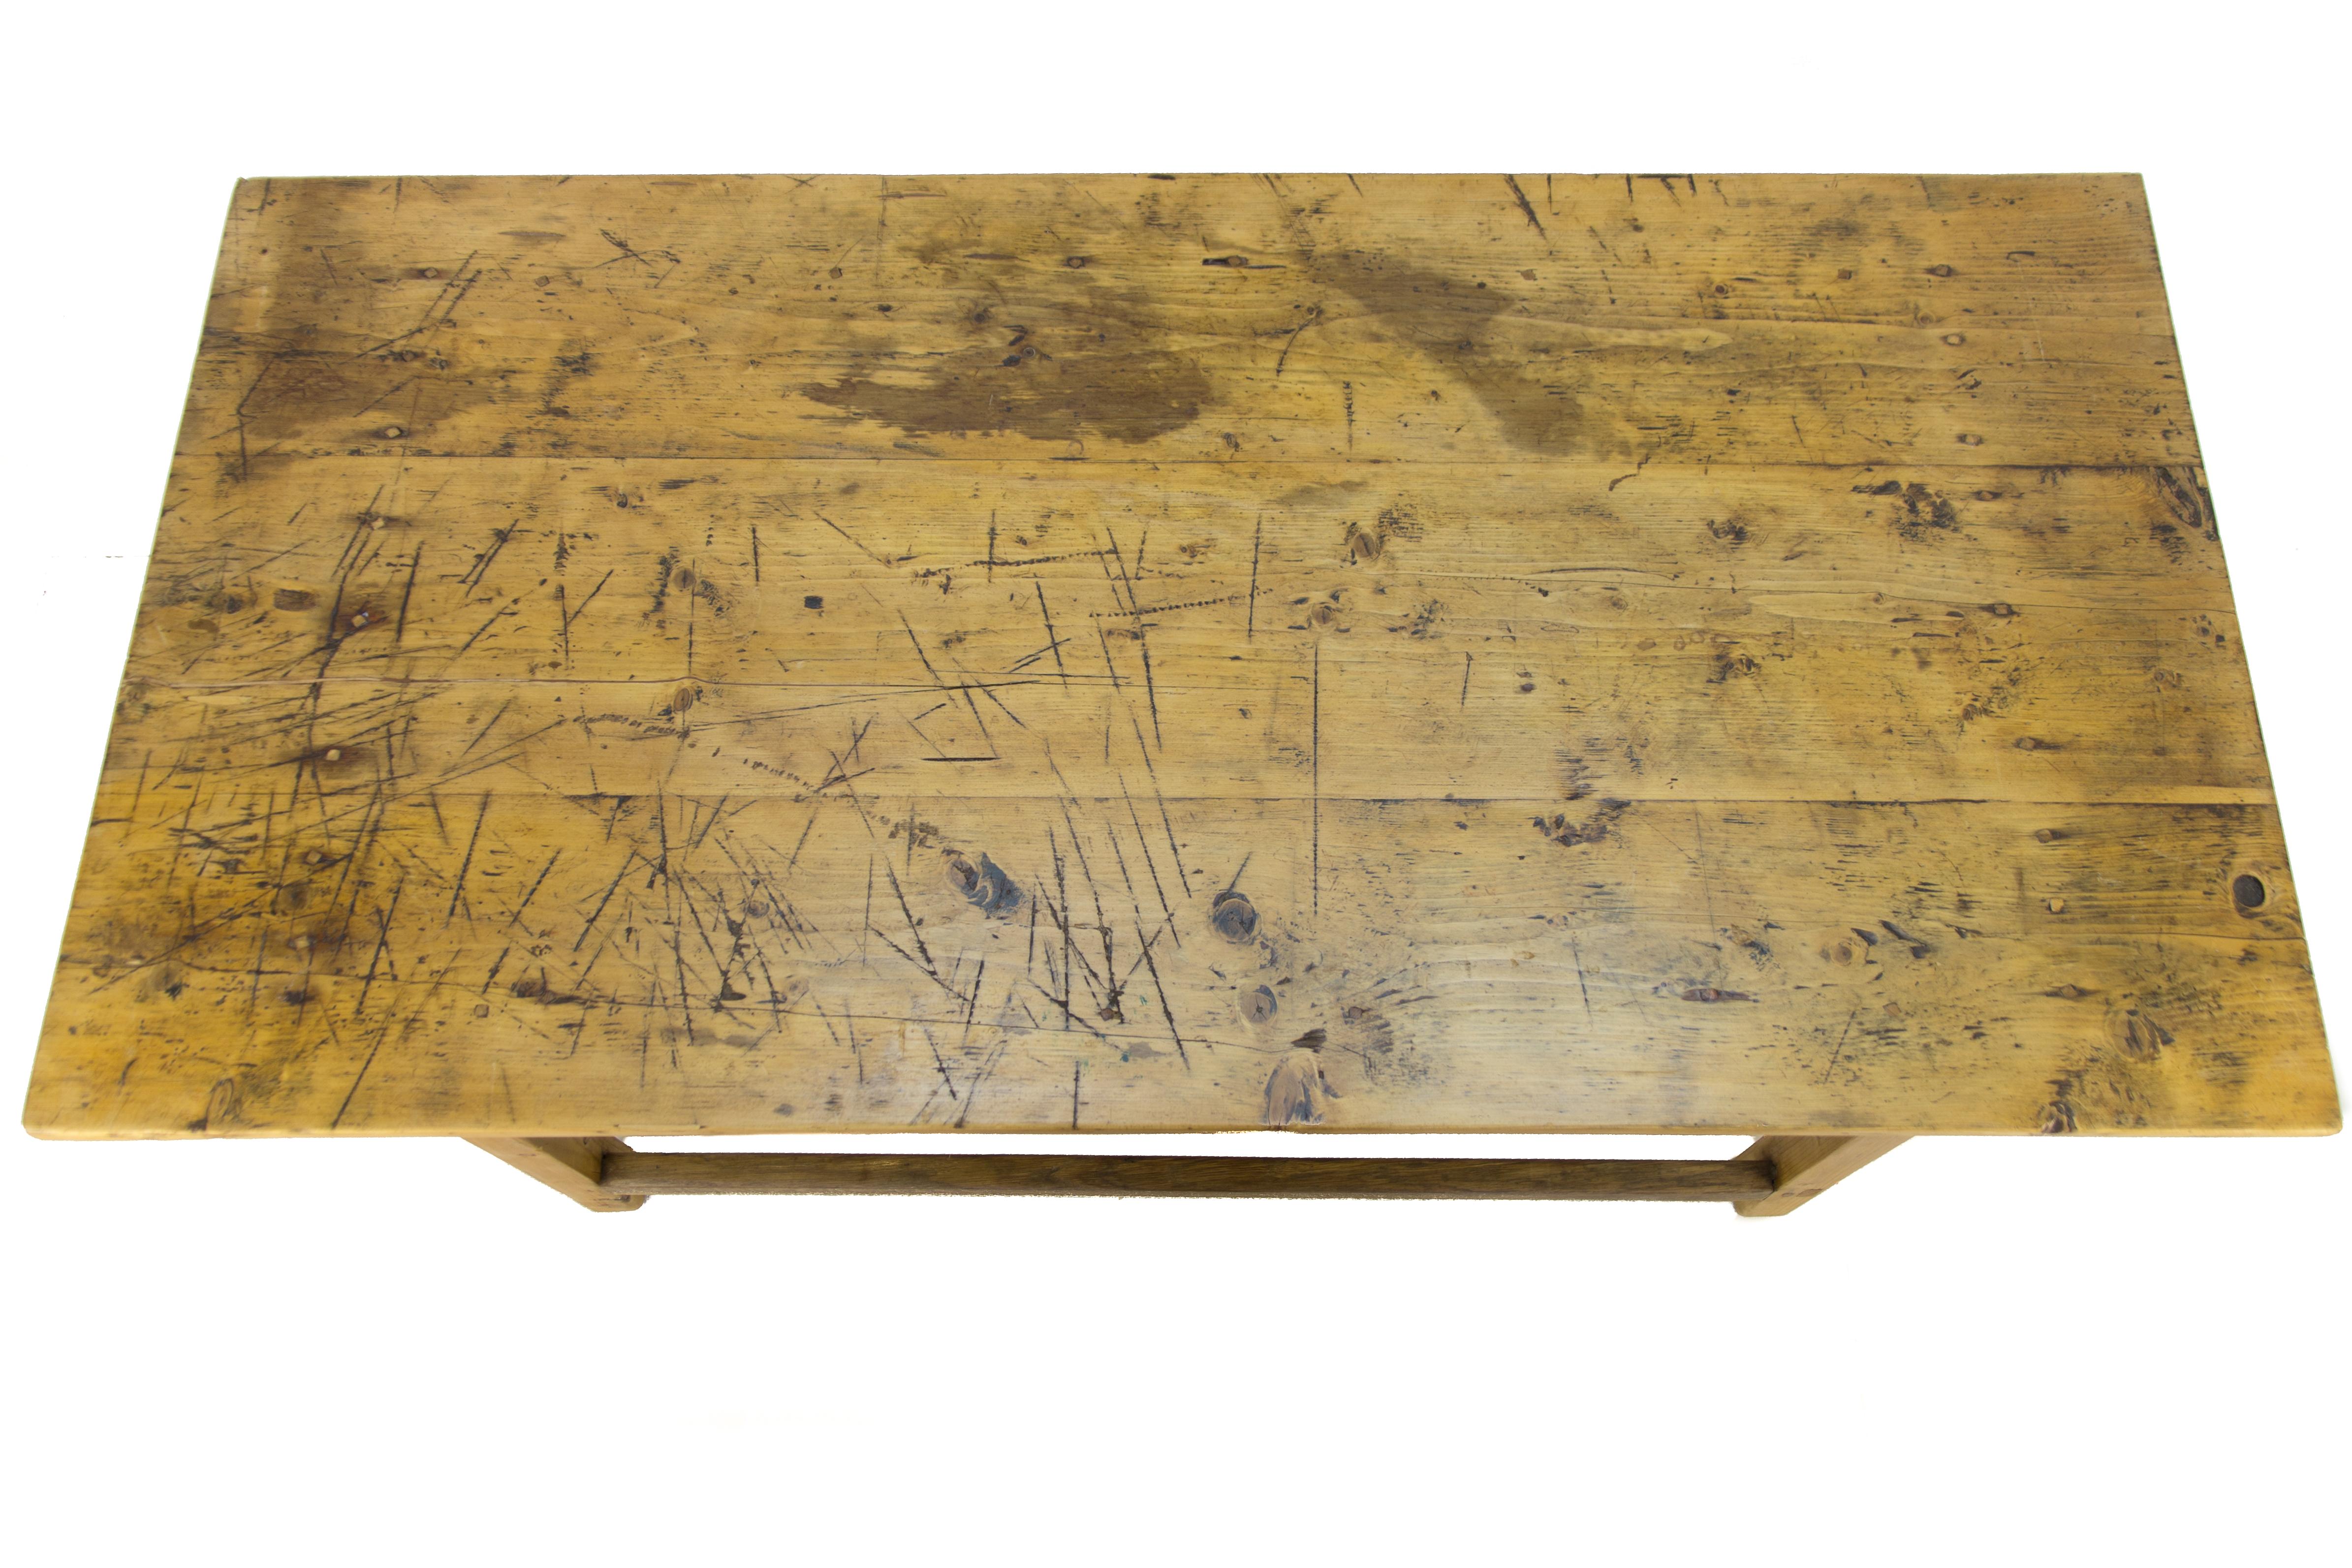 Rustic Country style table with two drawers. Made of Baltic pine, circa the 1930s. The table is of very solid construction, stable, and in good antique condition. Please expect dents, marks, and scuffs due to its age and use.
Dimensions: height 79